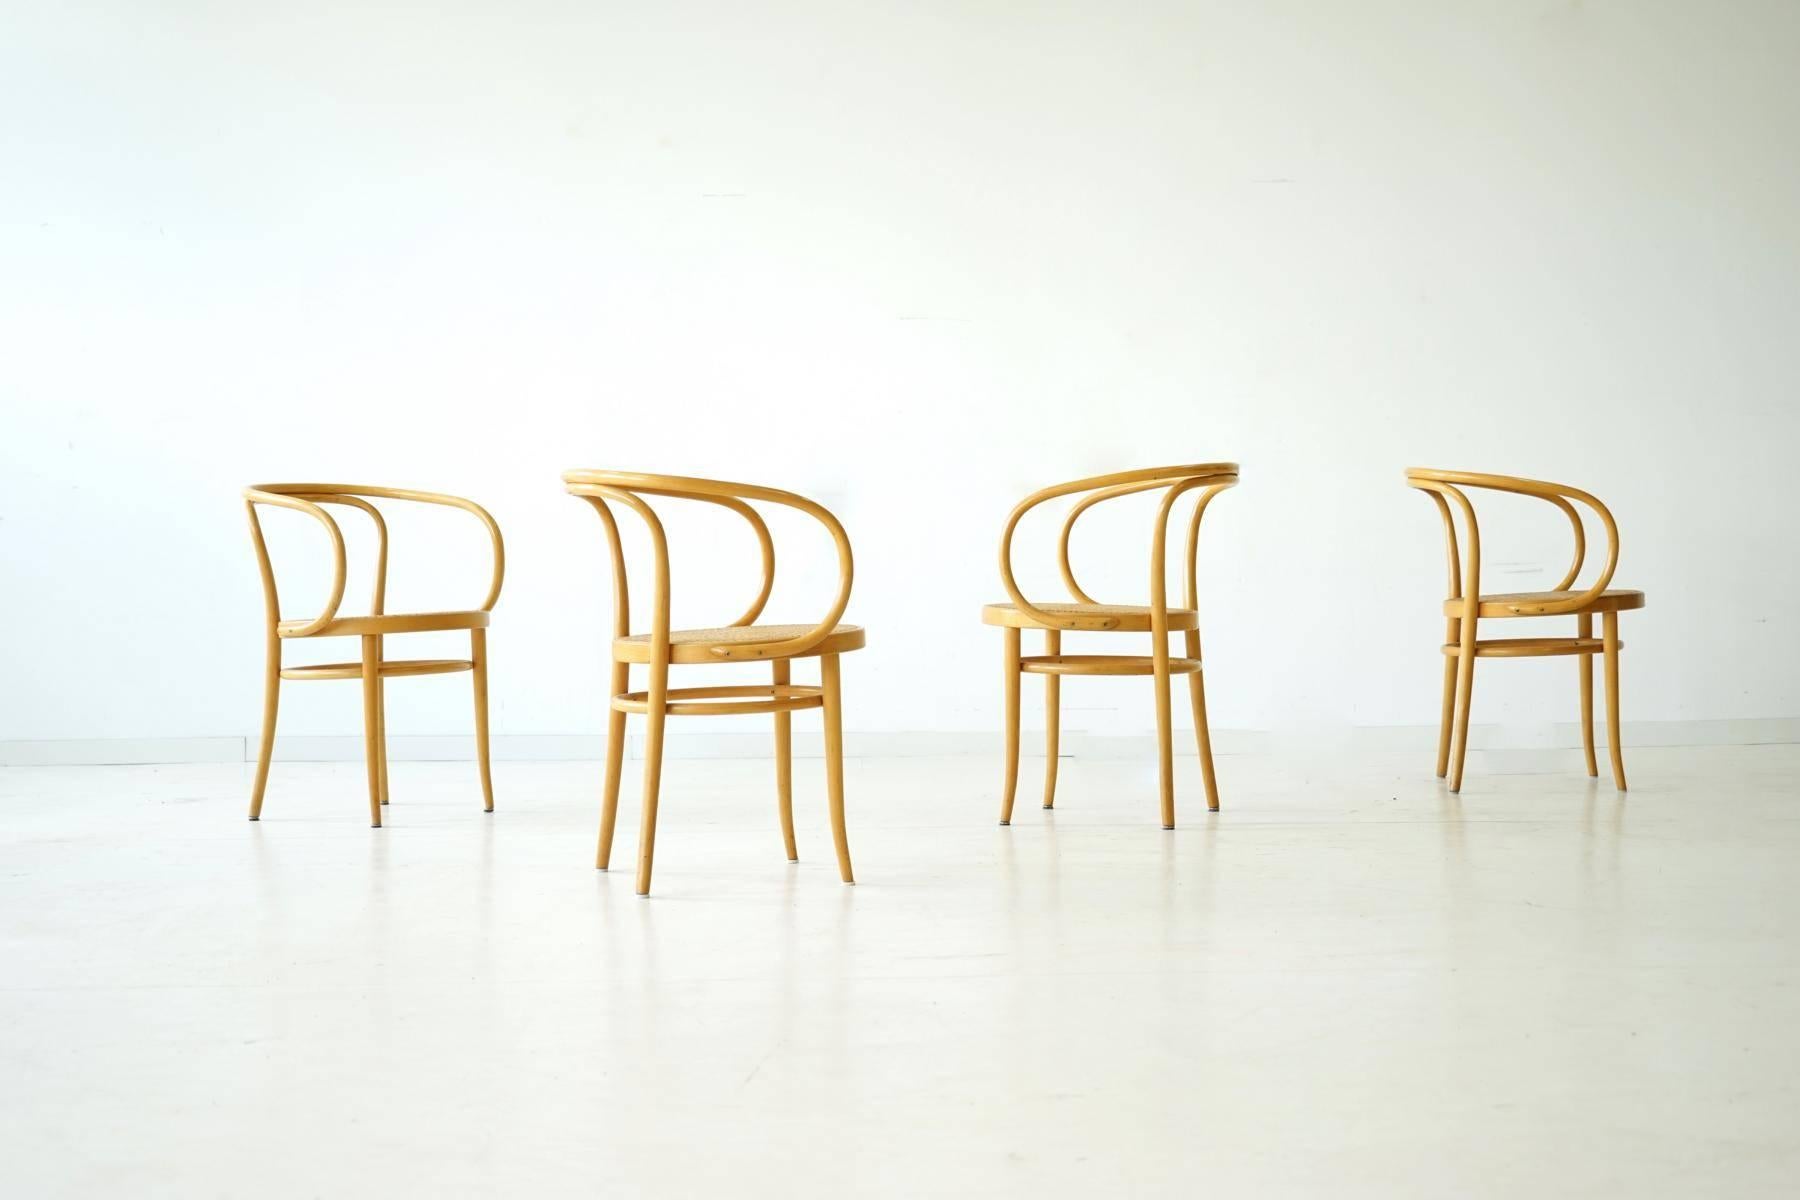 Set of four bentwood classic No. 209 Thonet armchair Bauhaus. The sculpture under the bentwood chairs.
Model: 209, Design: Brothers Thonet, 1900. Swiss architect Le Corbusier was fascinated with it and used it in many of his buildings, for example